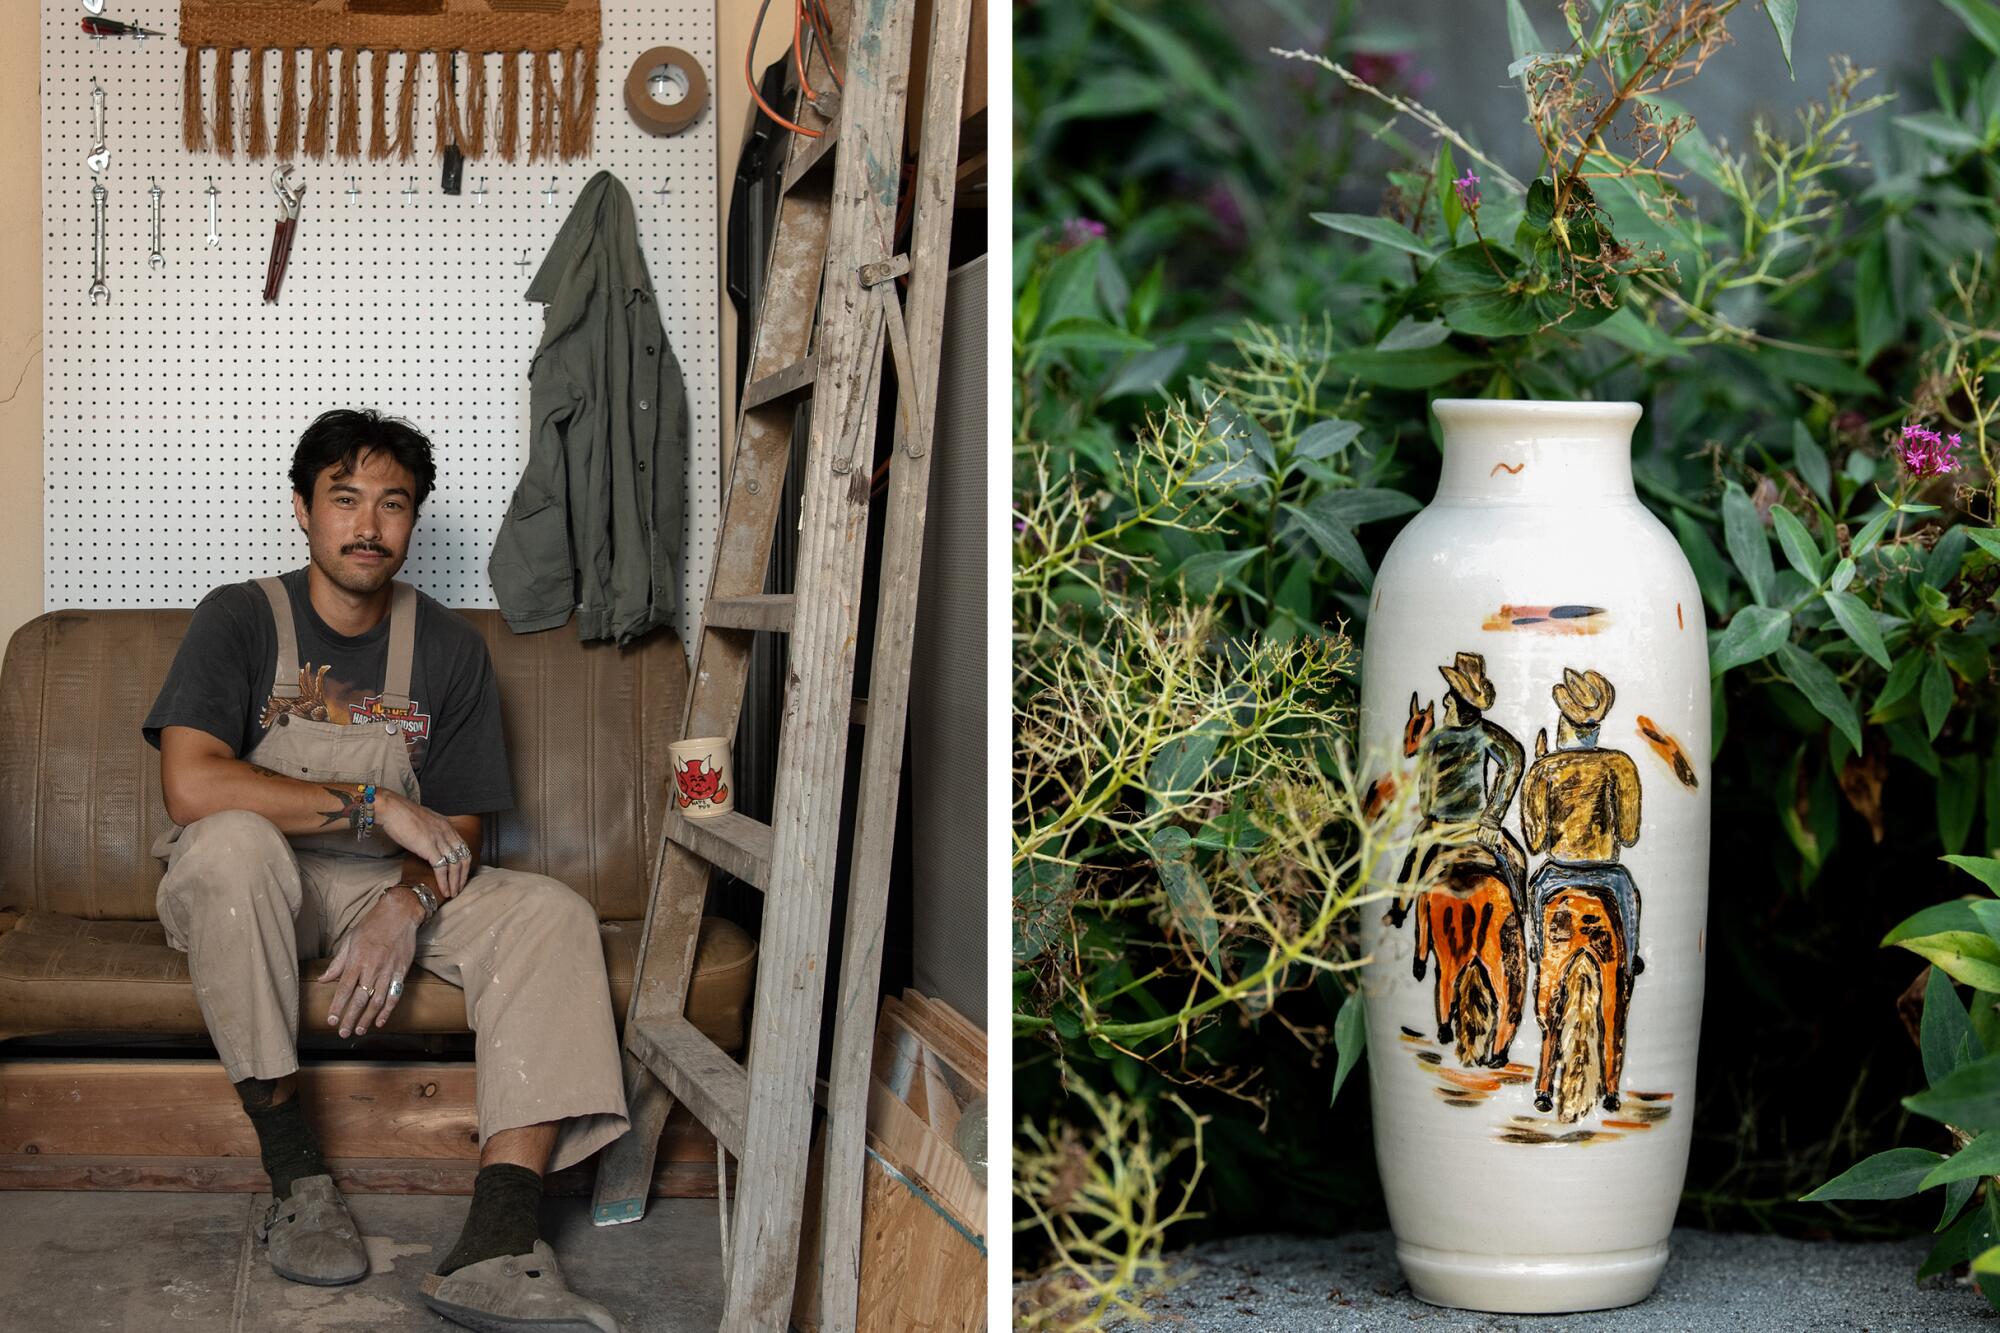 Daniel Dooreck throws pottery in his L.A. garage - Los Angeles Times